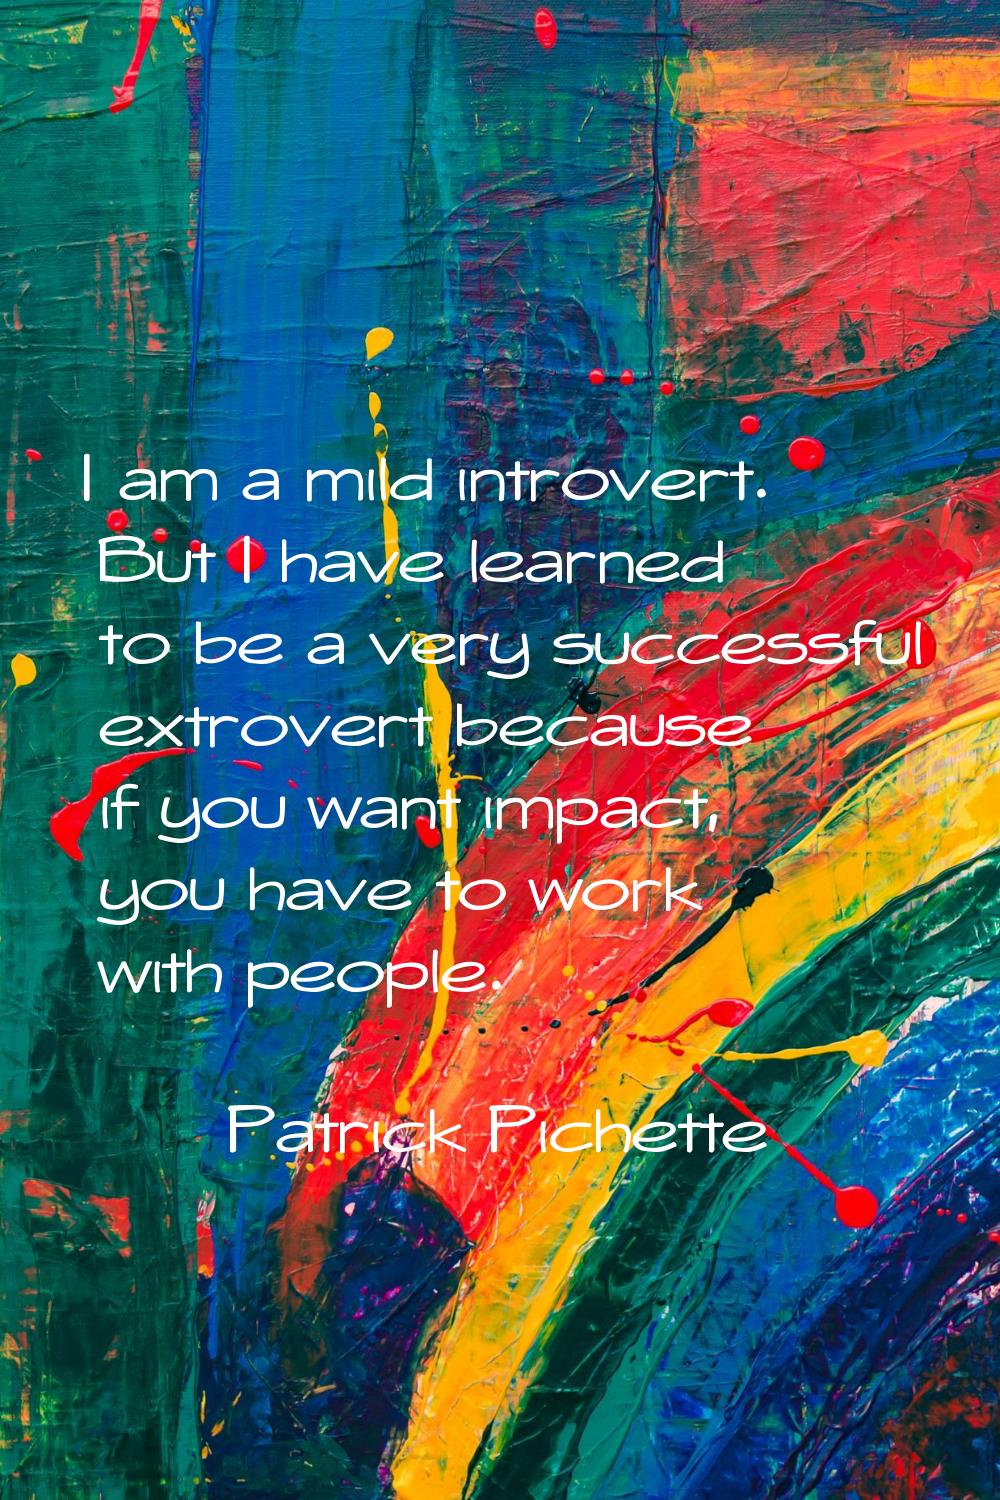 I am a mild introvert. But I have learned to be a very successful extrovert because if you want imp